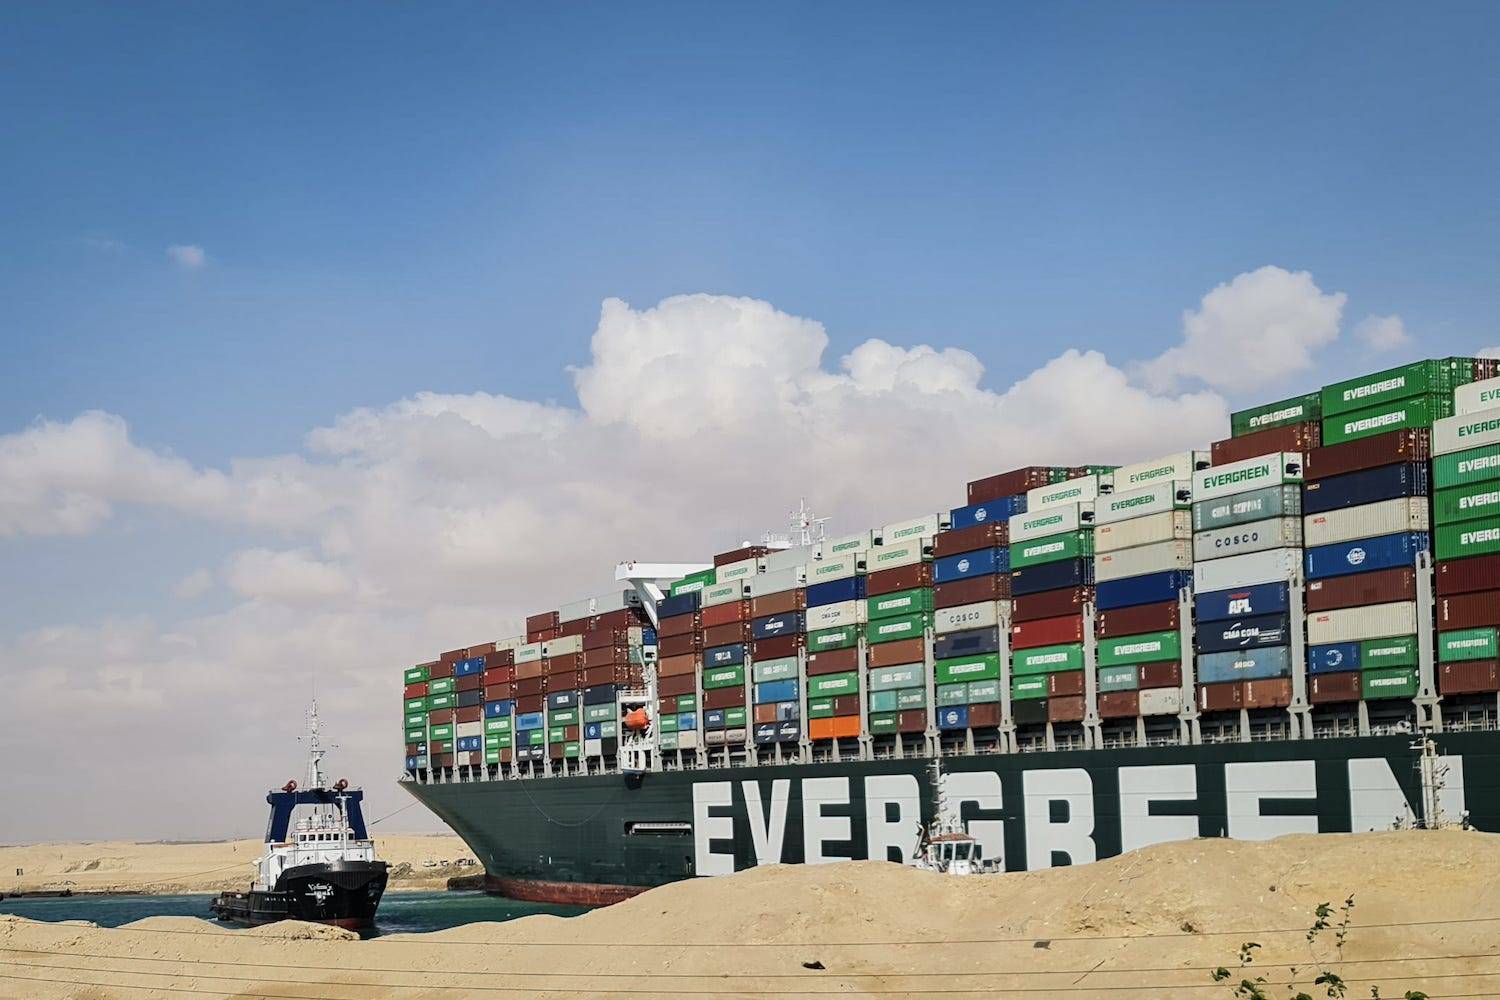 The Suez Canal blockage may affect the global supply chain ...